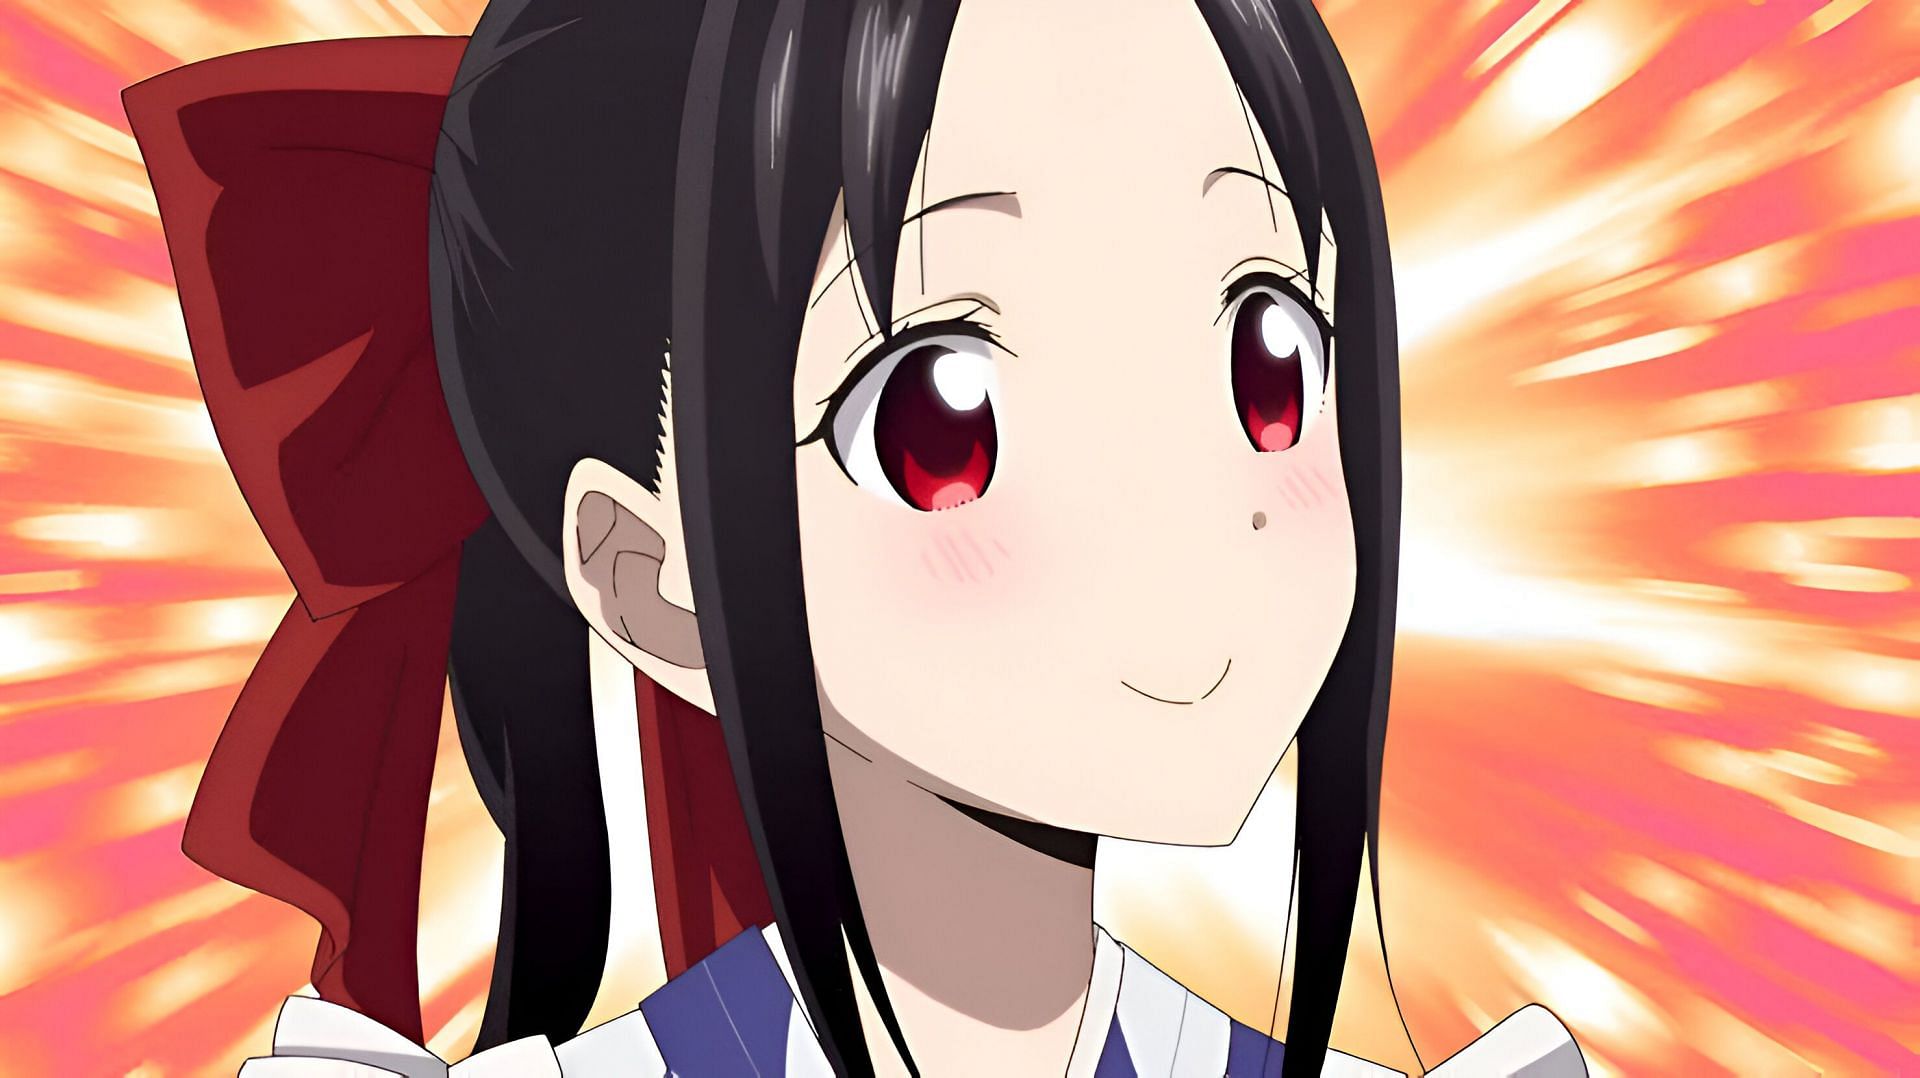 Kaguya as seen in the anime (Image via A-1 Pictures)